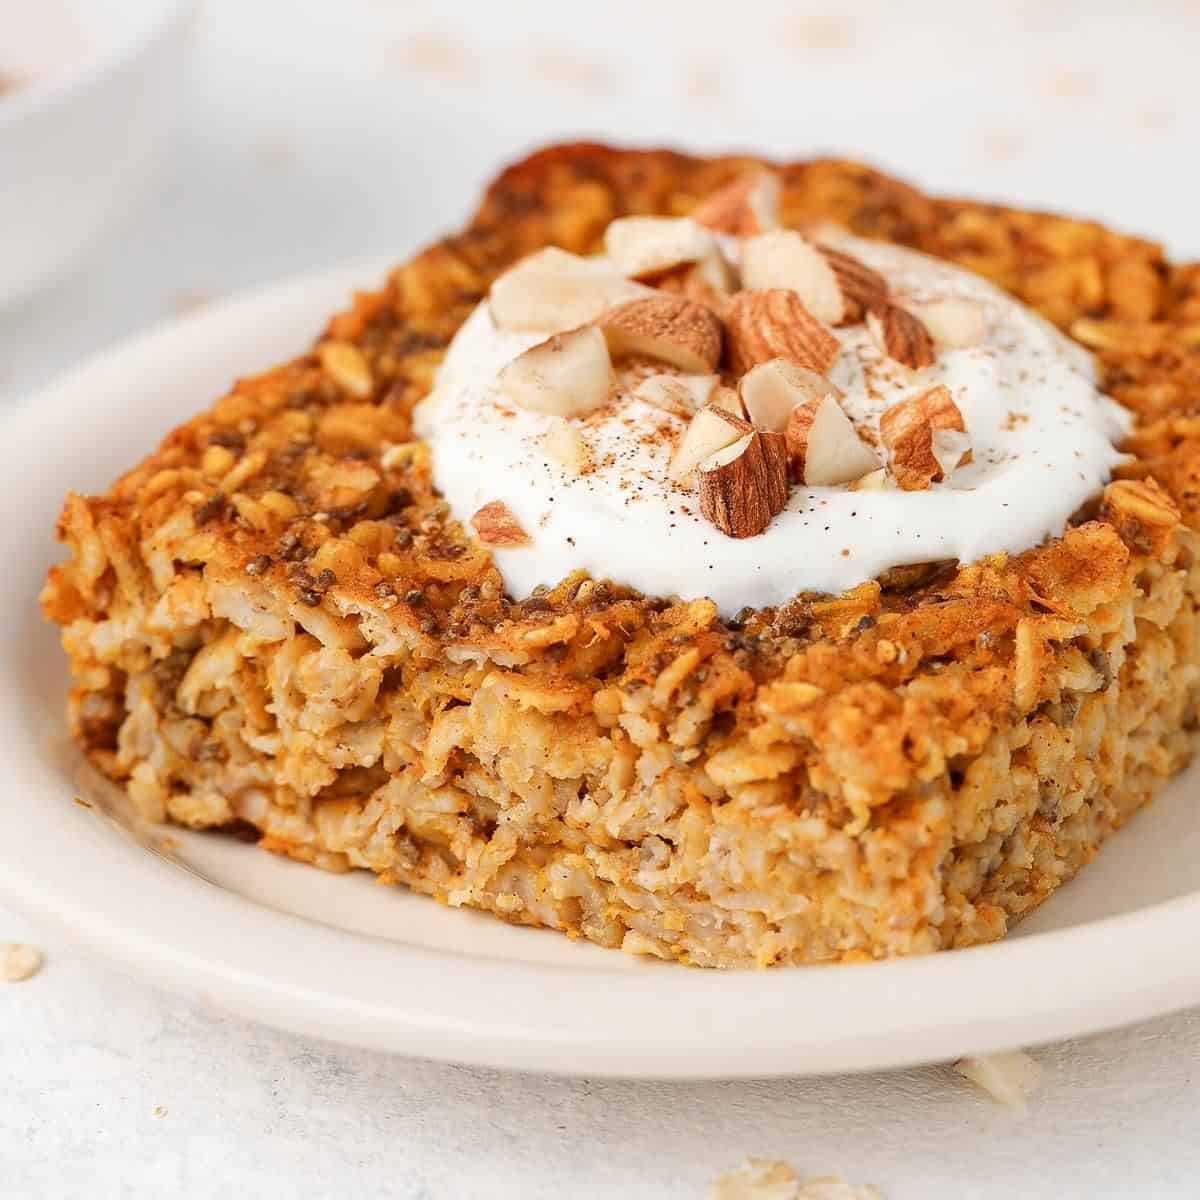 Slice of baked oats on a round white plate, topped with yoghurt and chopped almonds.